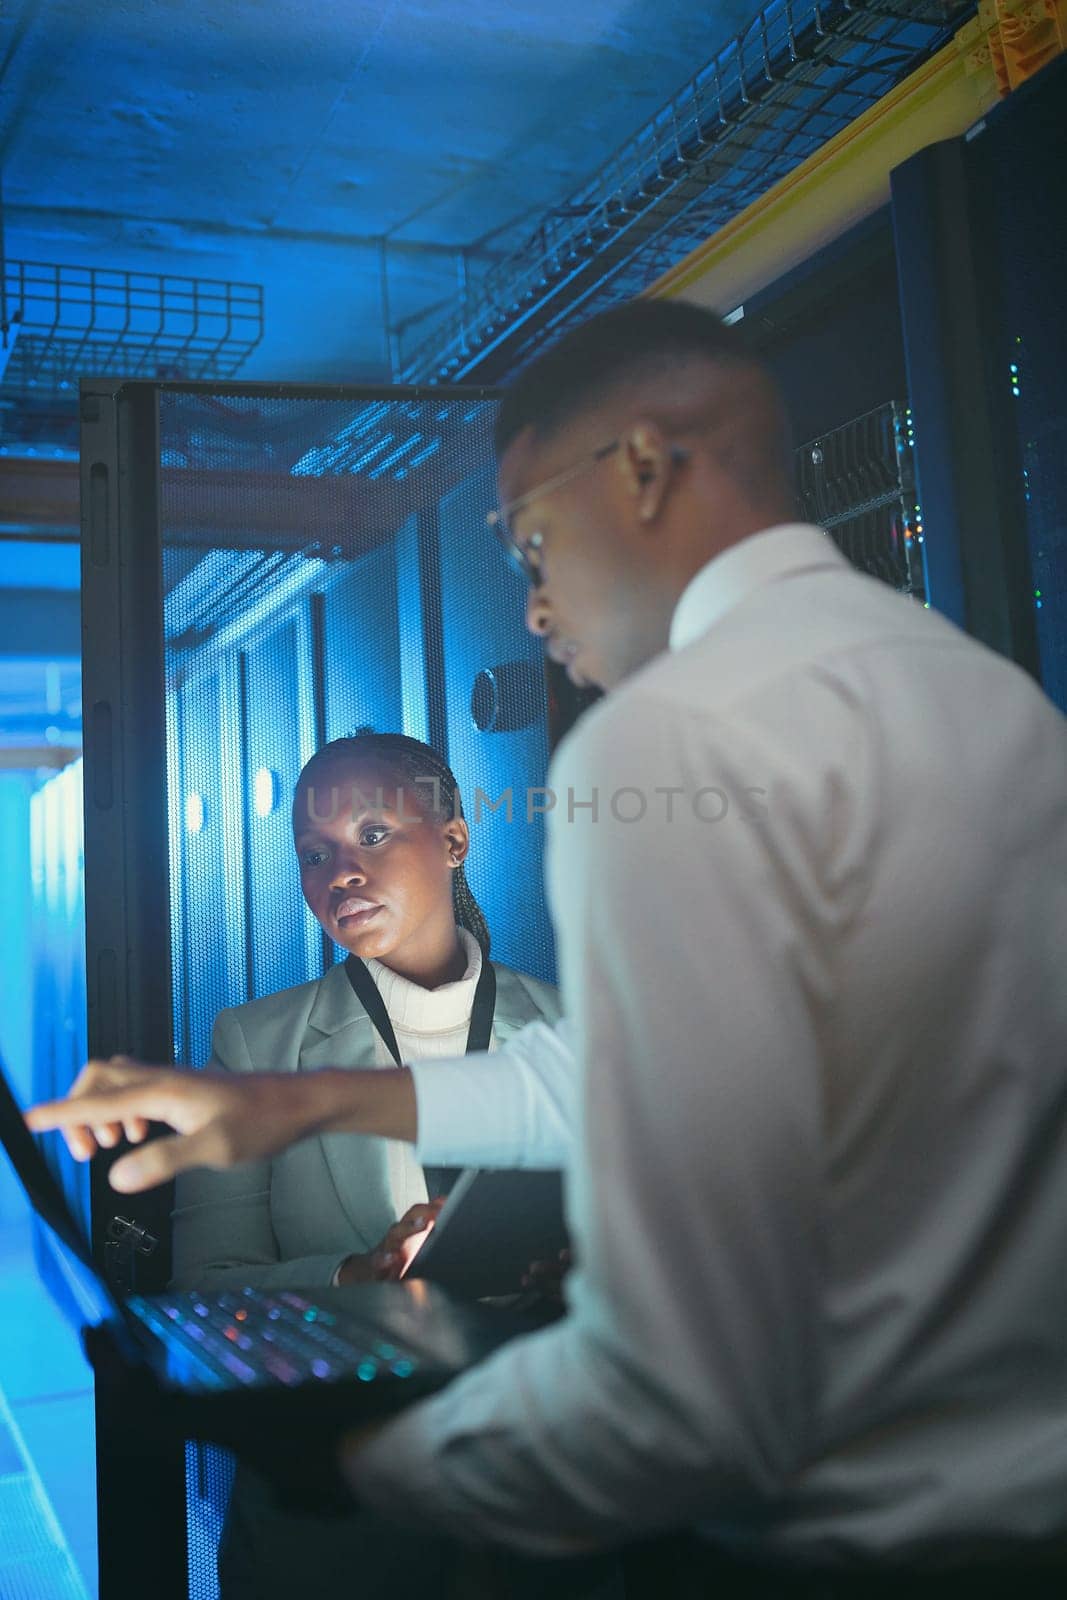 Were suffering from low download speeds. two young IT specialists standing in the server room and having a discussion while using a technology. by YuriArcurs